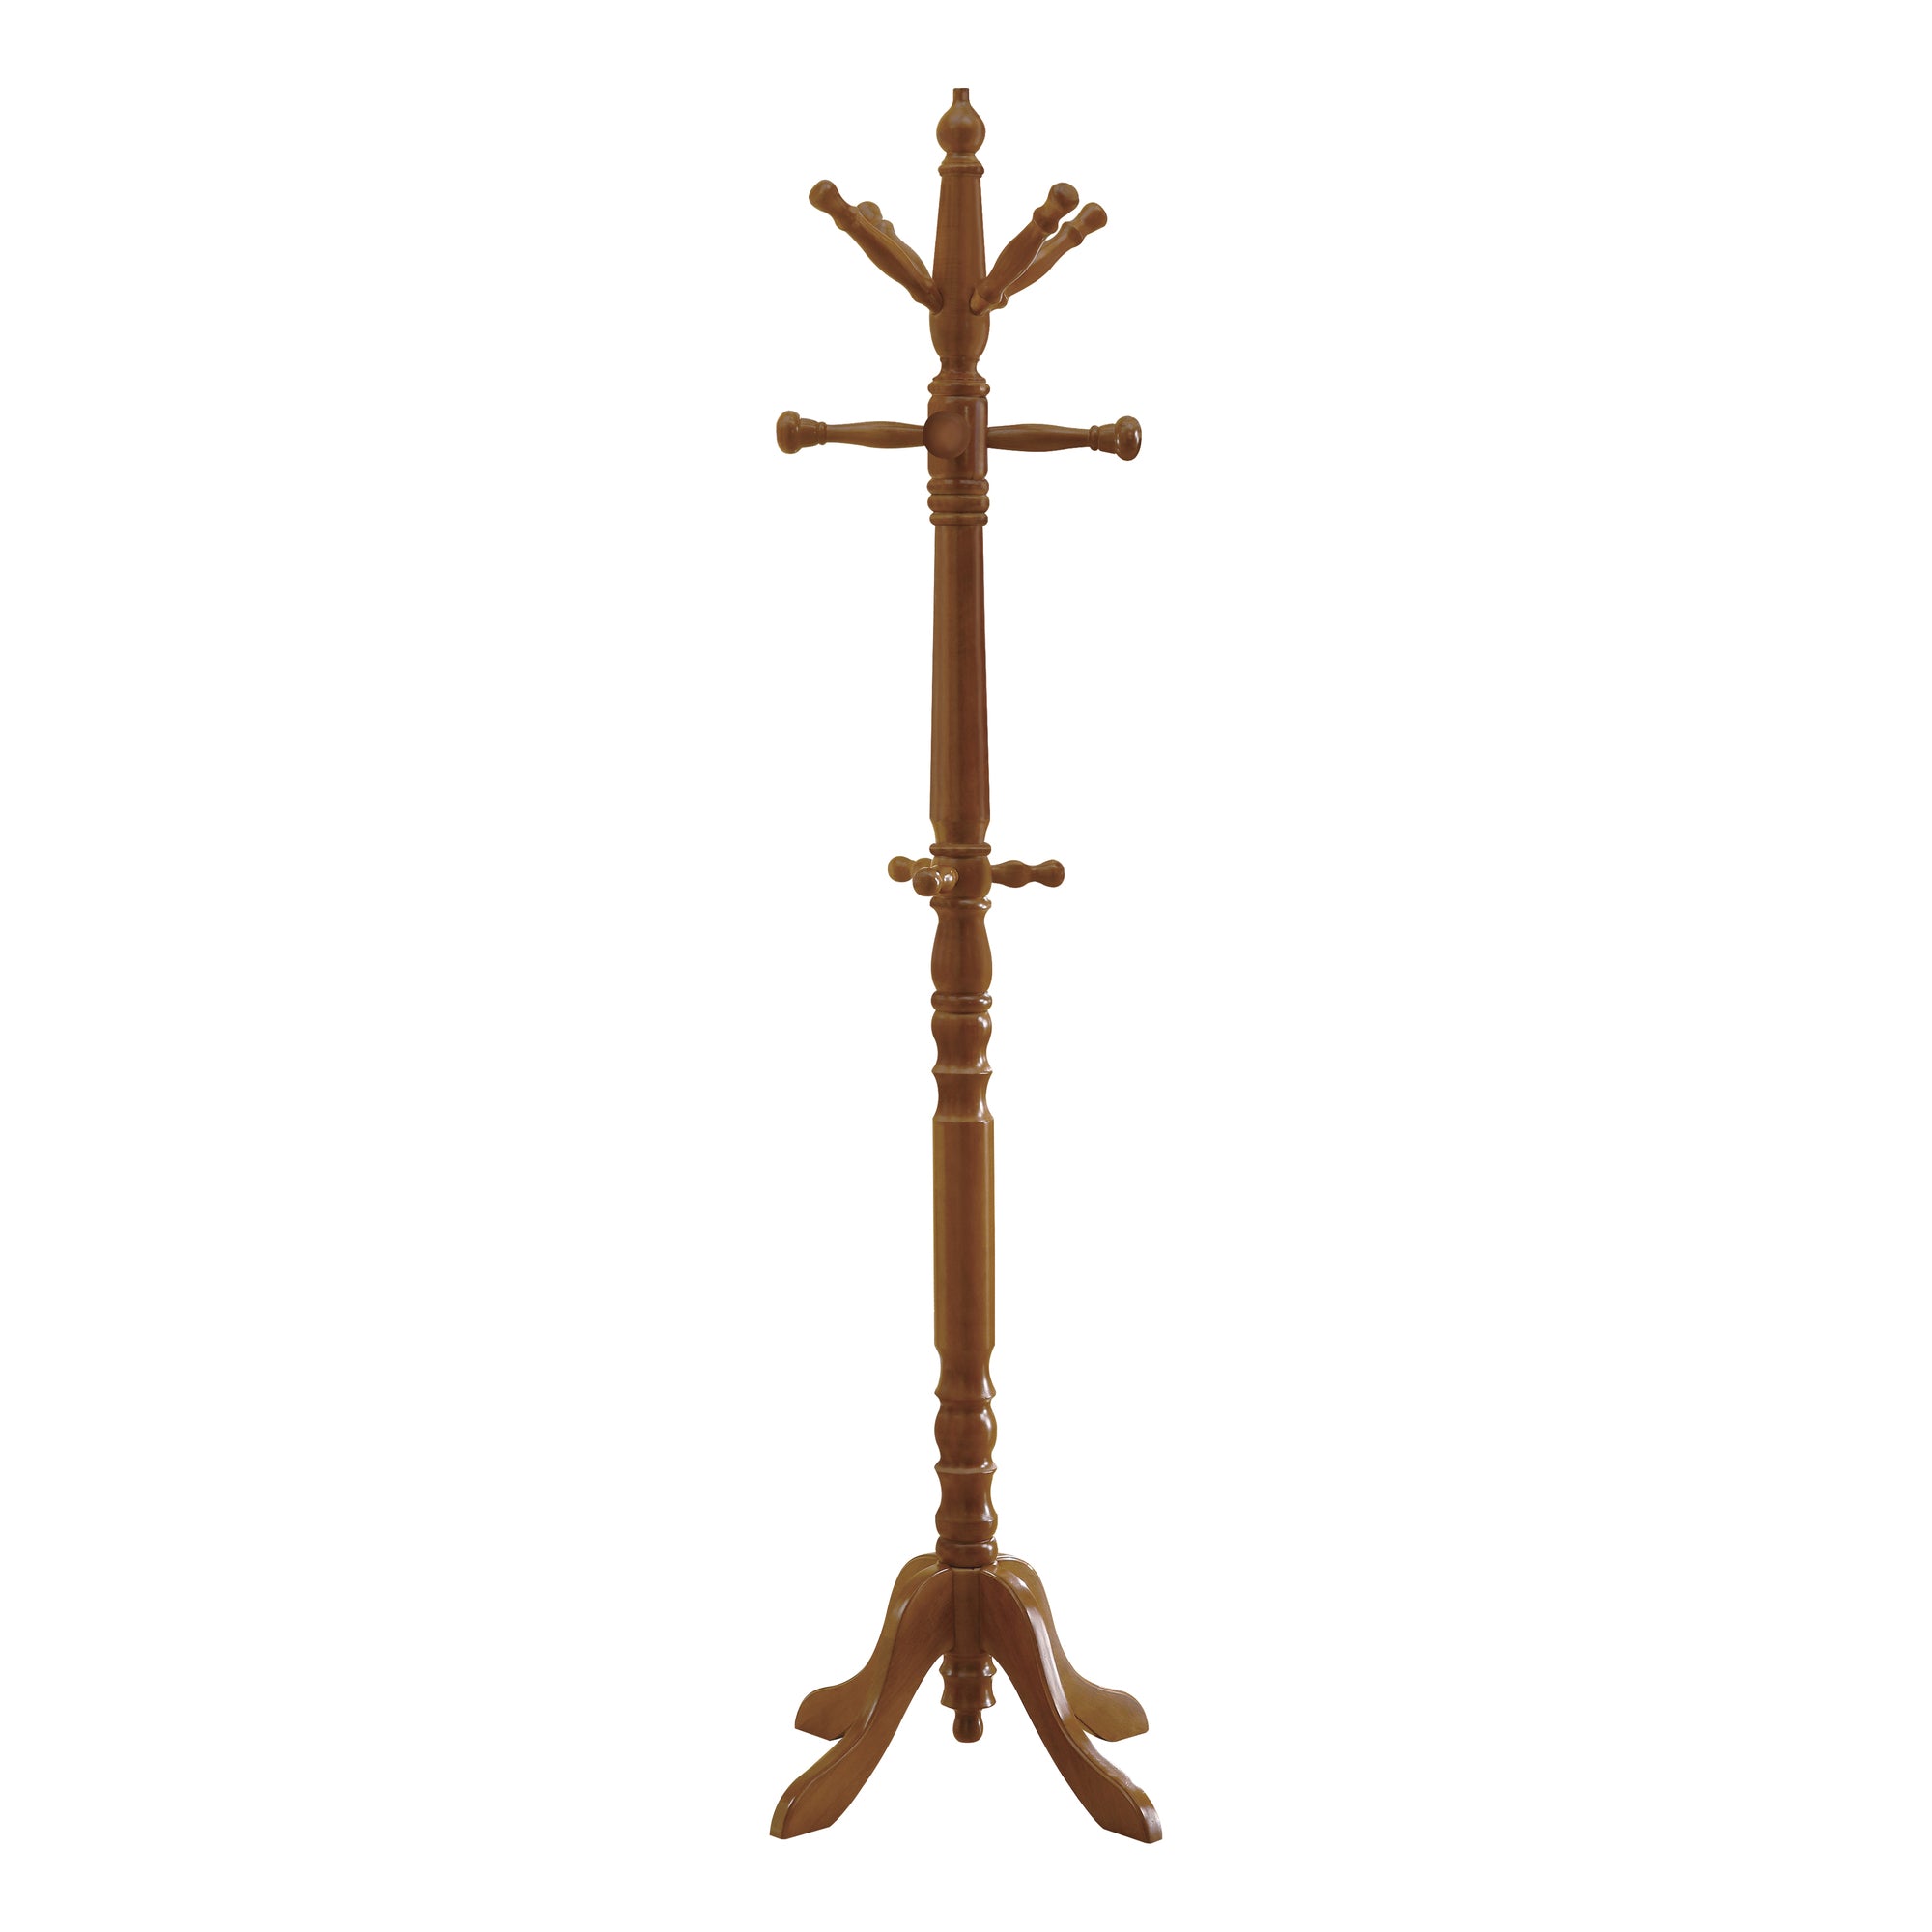 COAT RACK - 73"H / CHERRY WOOD TRADITIONAL STYLE